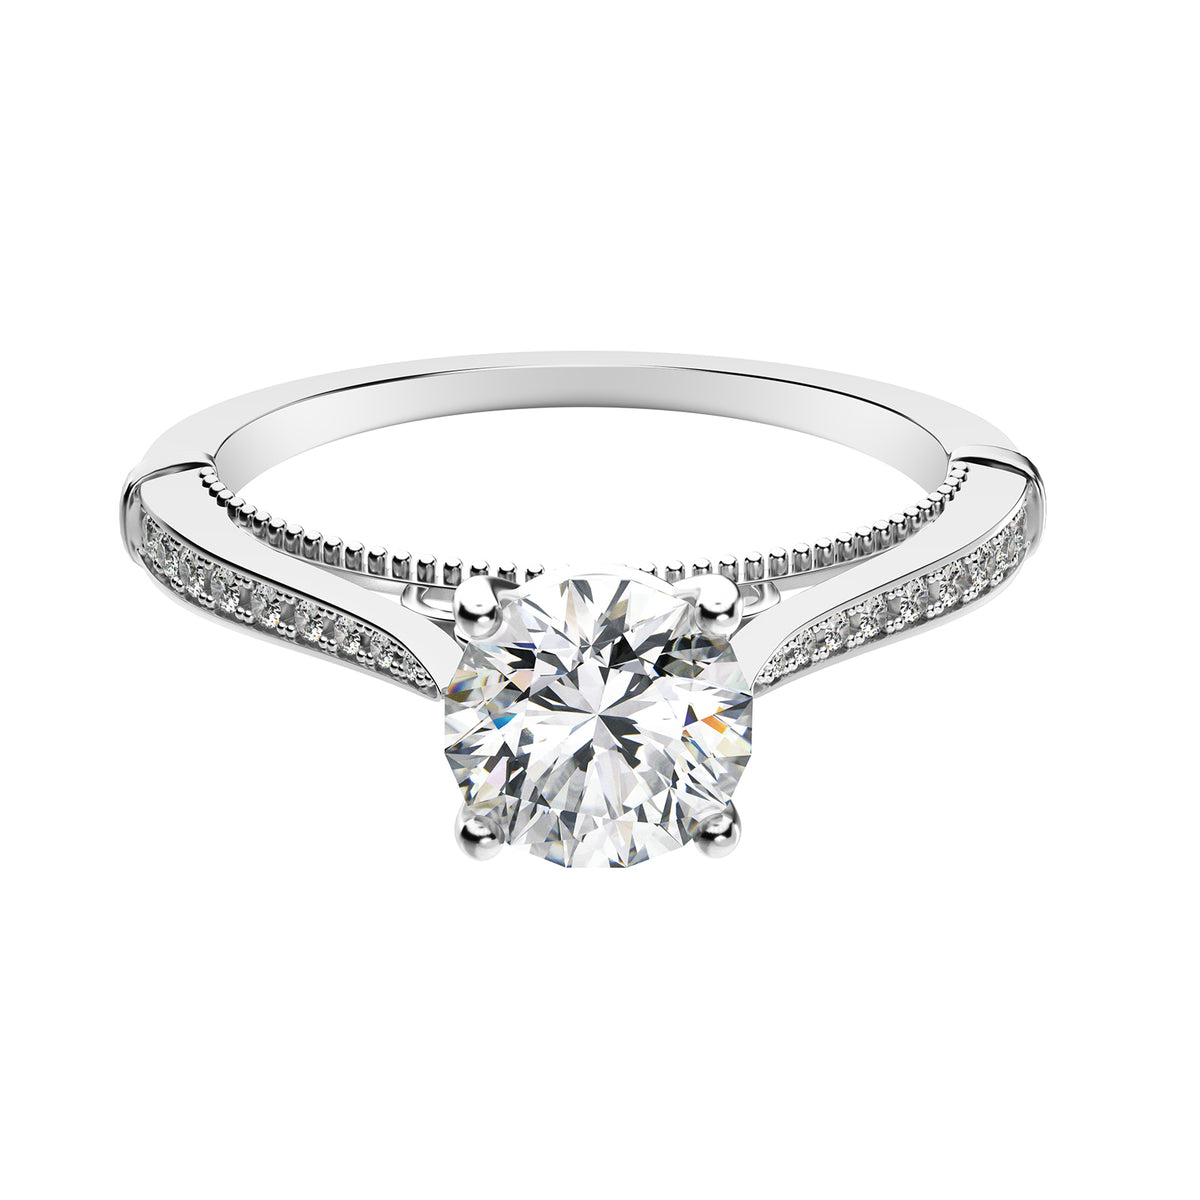 1 Row Detailed Accented Round Cut Moissanite Diamond Ring in Yellow/White Gold